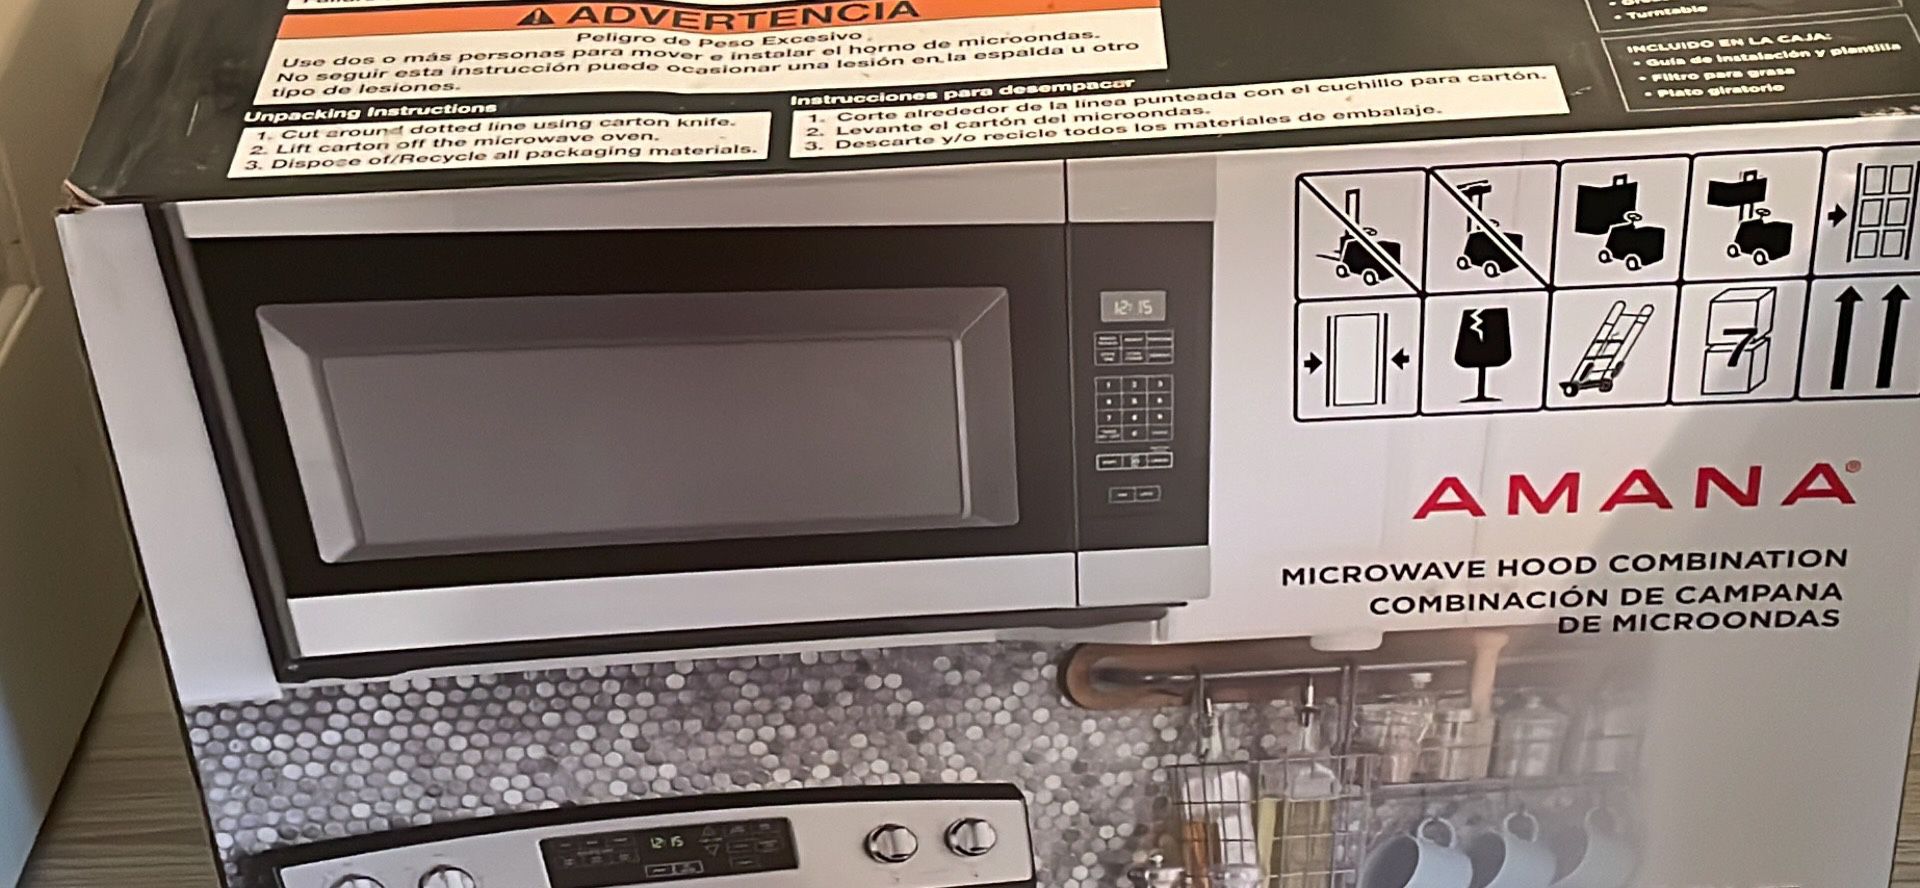 Microwave - In The Box!